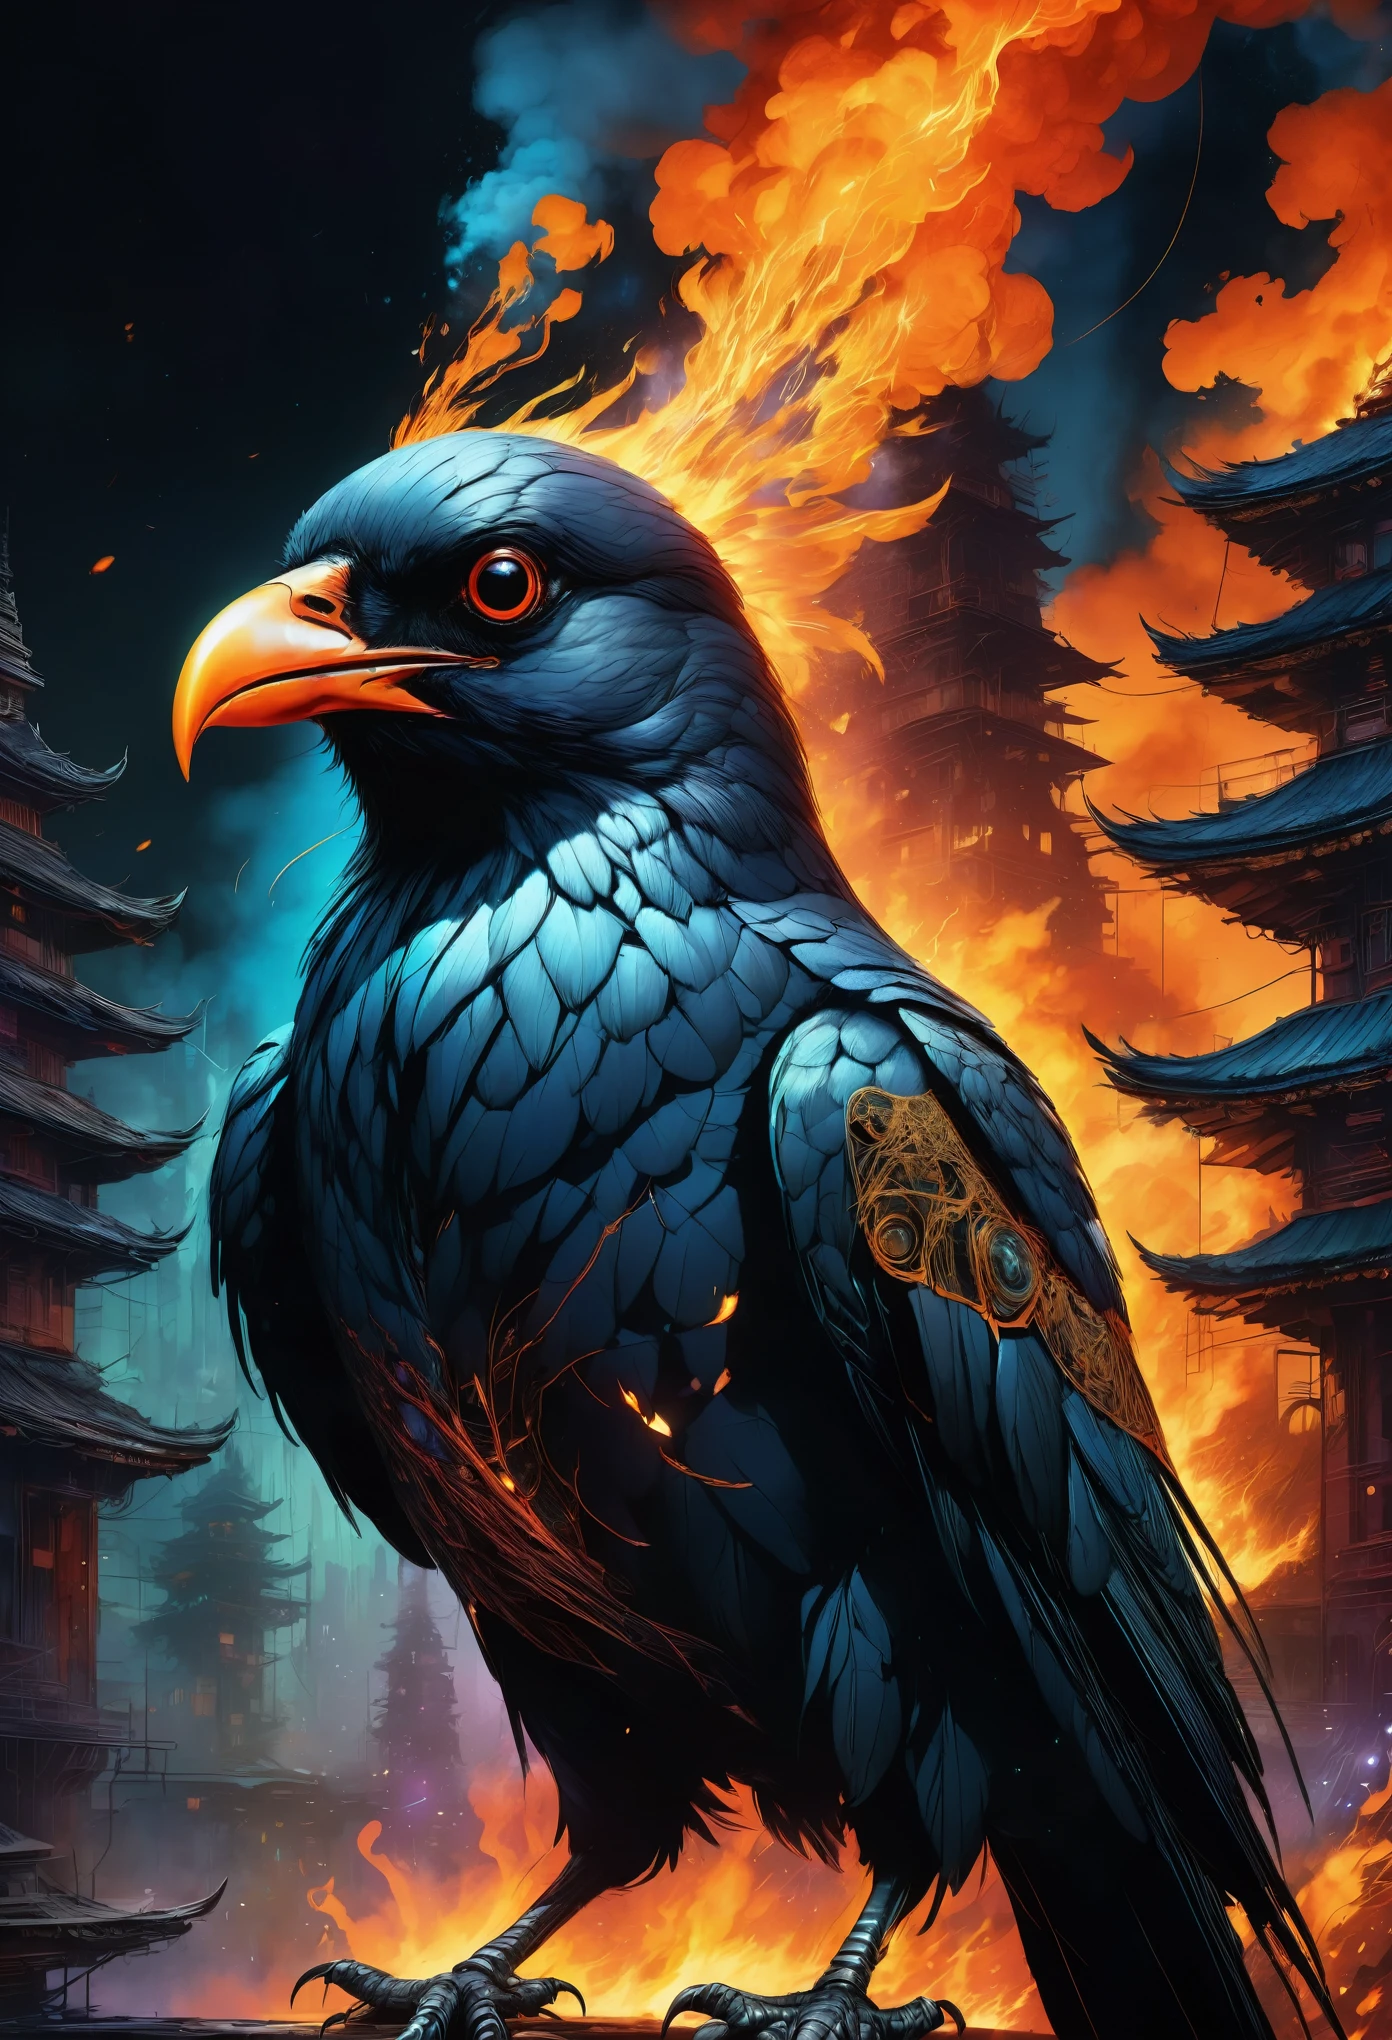 A masterful artistic digital rendering of a sinister glowing cybernetic crow made from sparks and fire by Simon Prades, russ mills, Shaun Ryken, celestial, UHD, 8k resolution, fantasy editorial art, color grading, intricate, hyperdetailed, beautiful composition, a modern surrealistic masterpiece by Dan Mumford